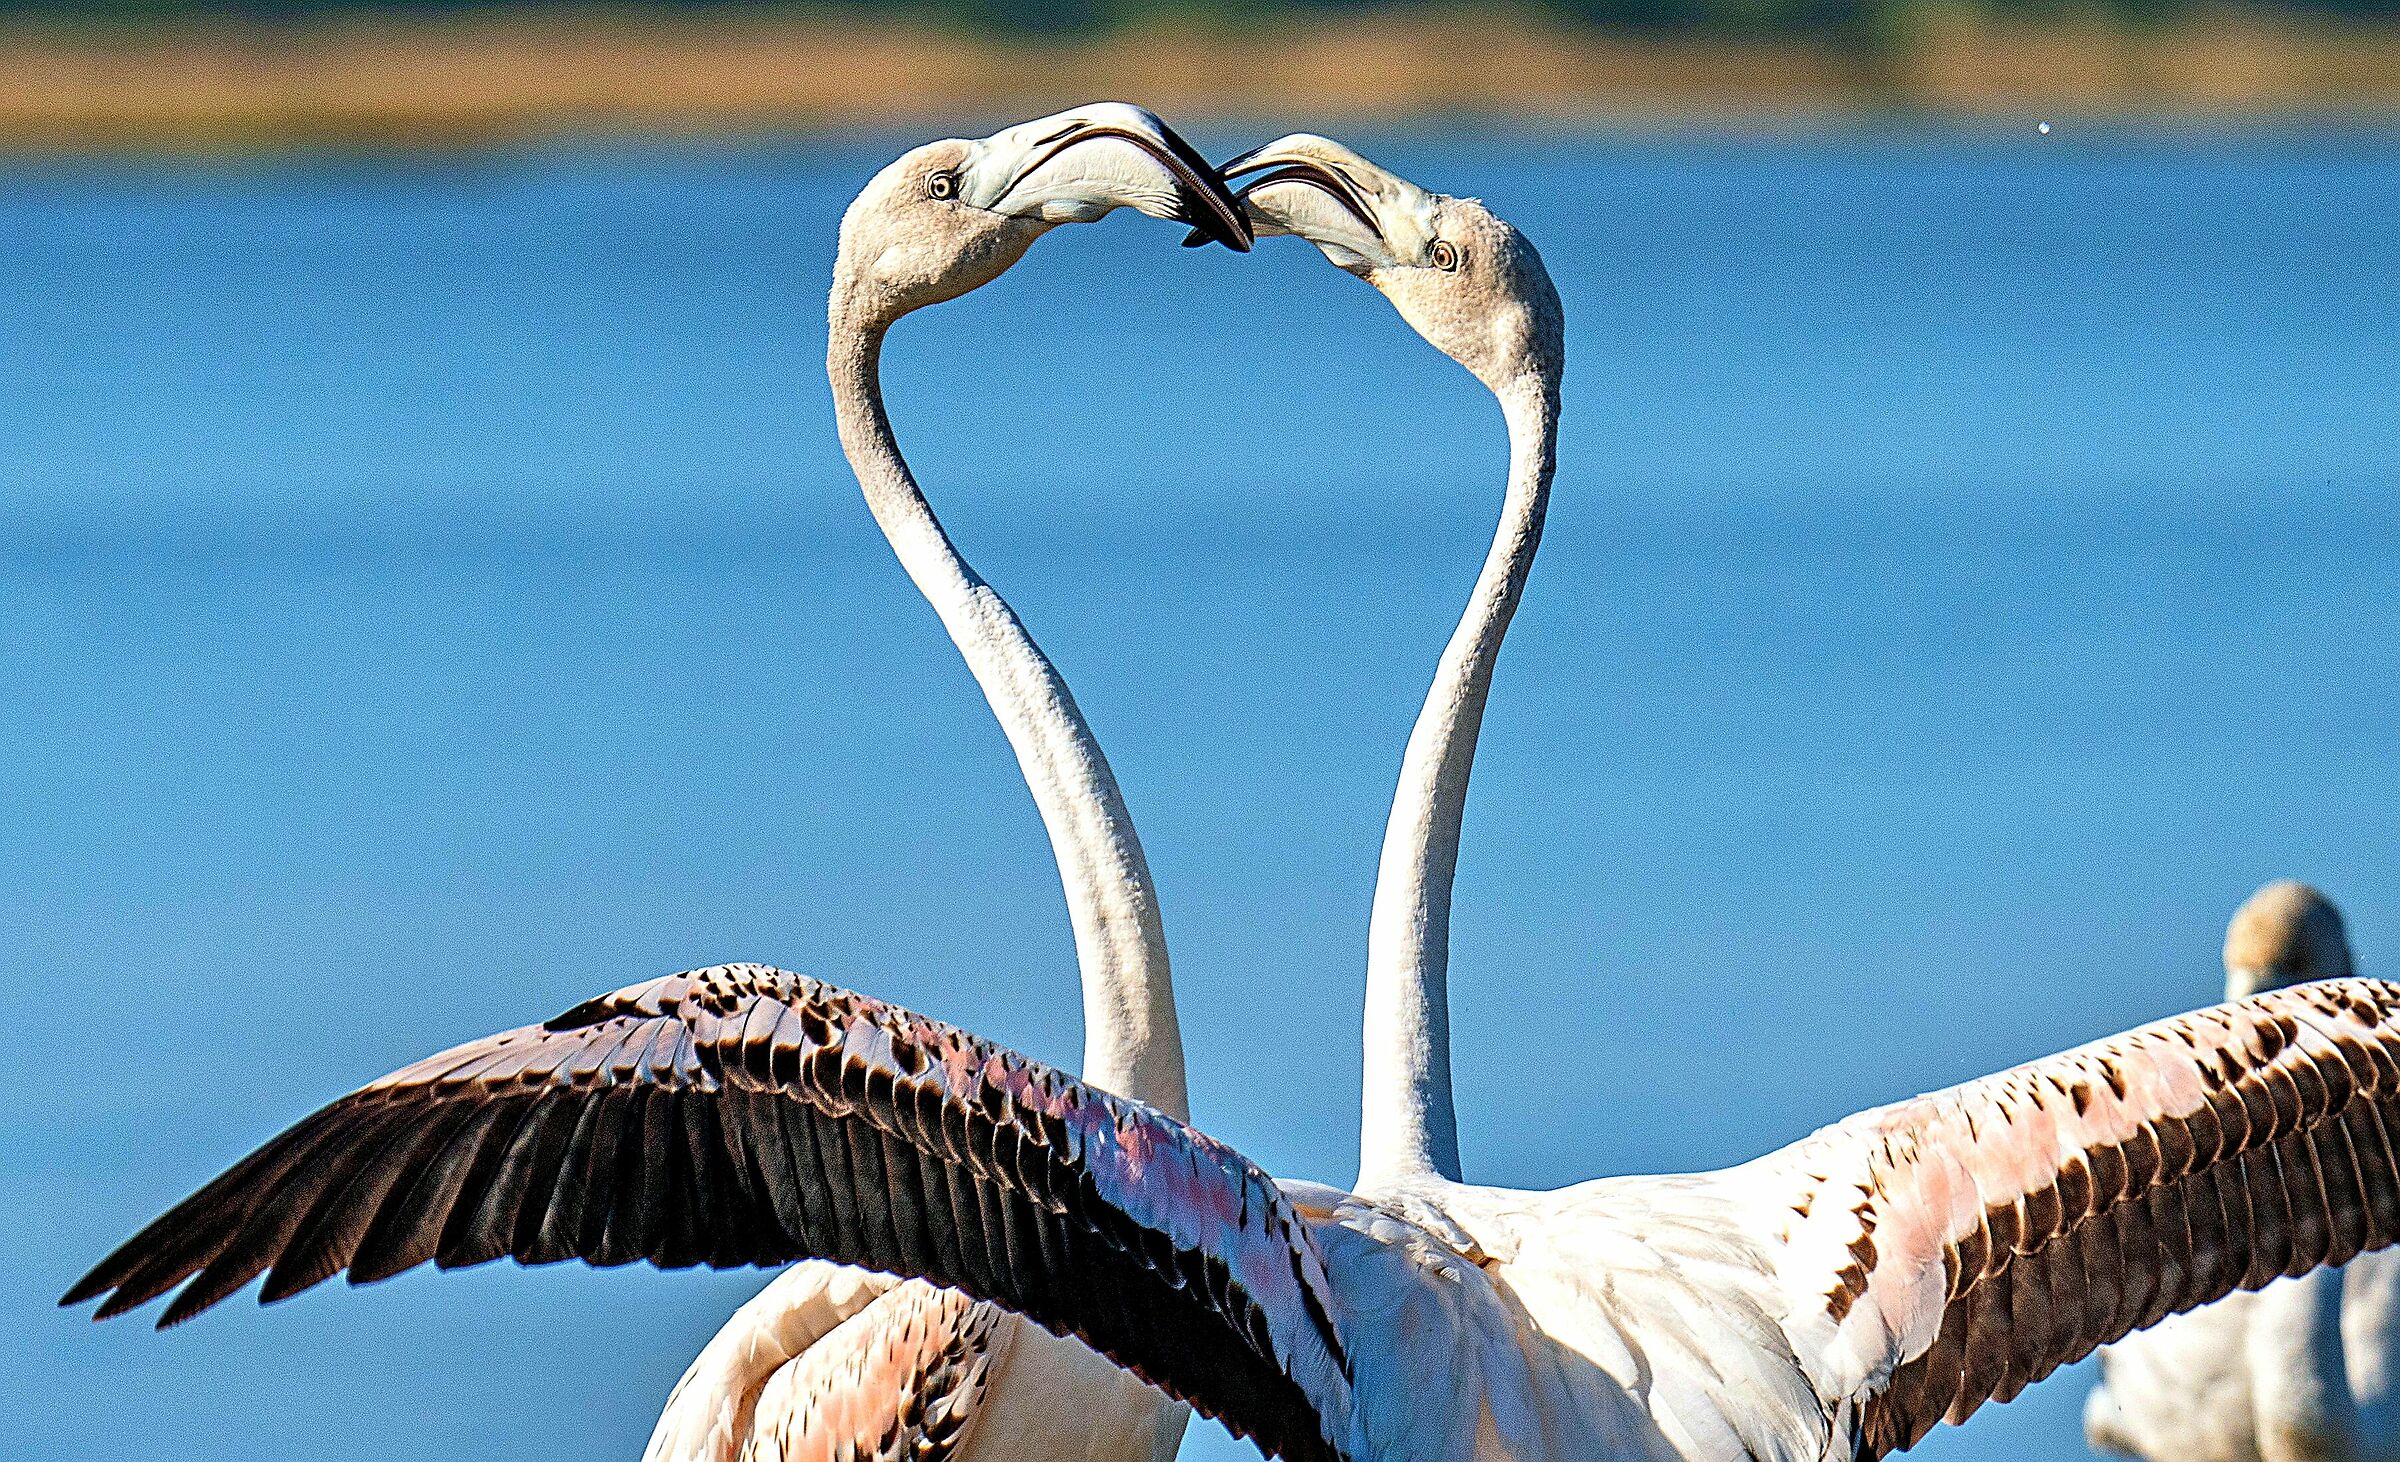 The embrace of young flamingos ...